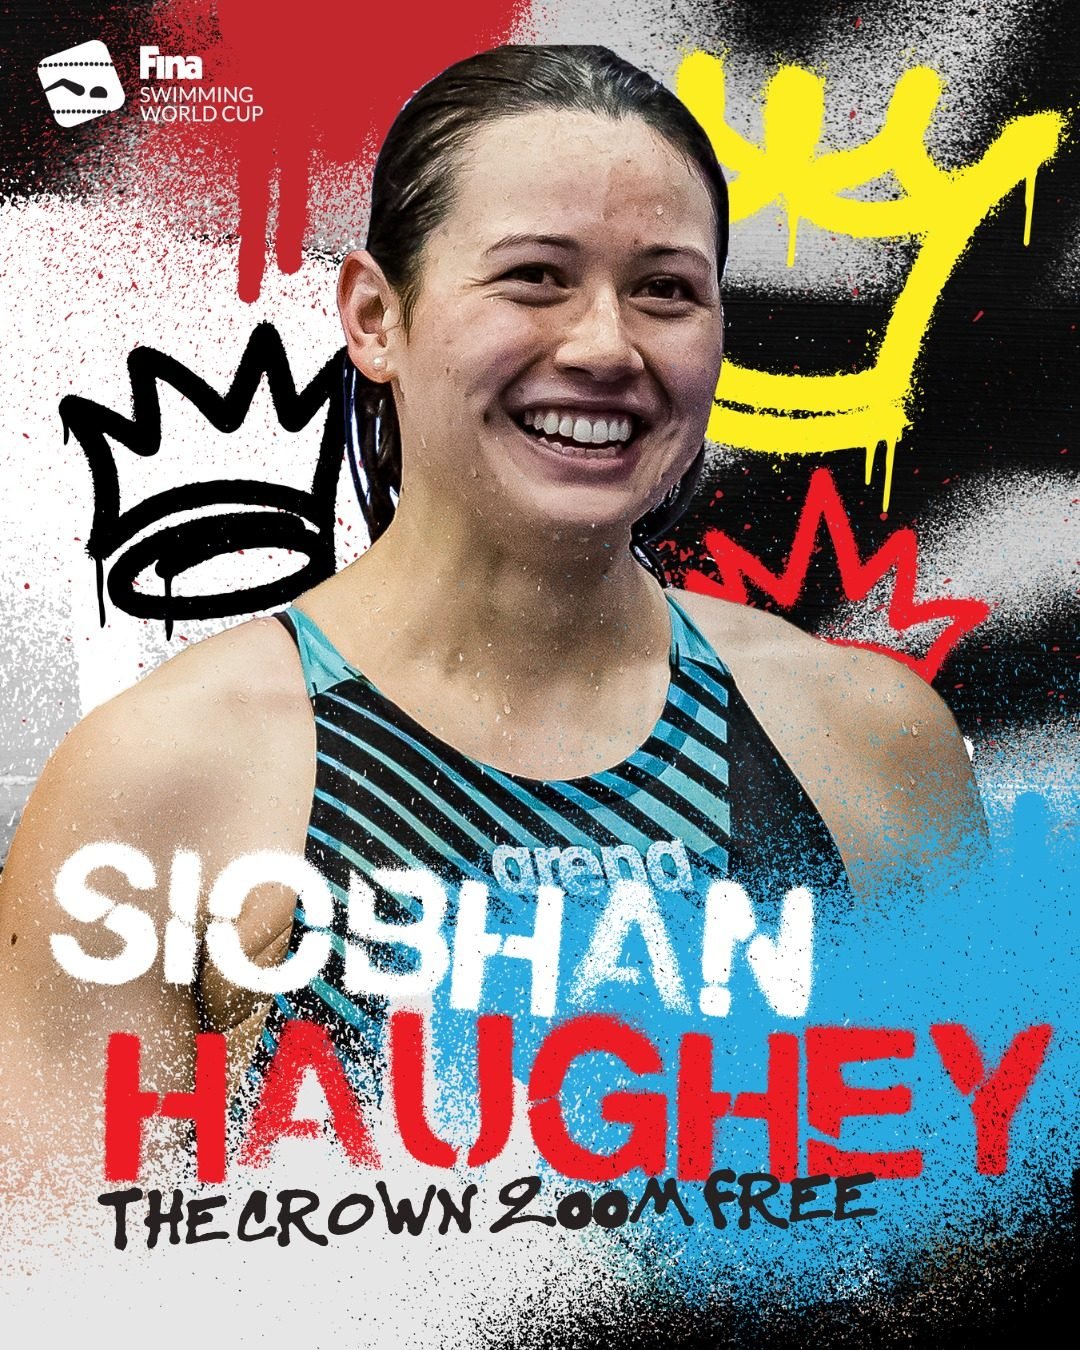 Siobhan Haughey is the Queen of 200m freestyle of the World Cup after dominating all three legs in Berlin, Toronto and Indianapolis. Photo: Fina